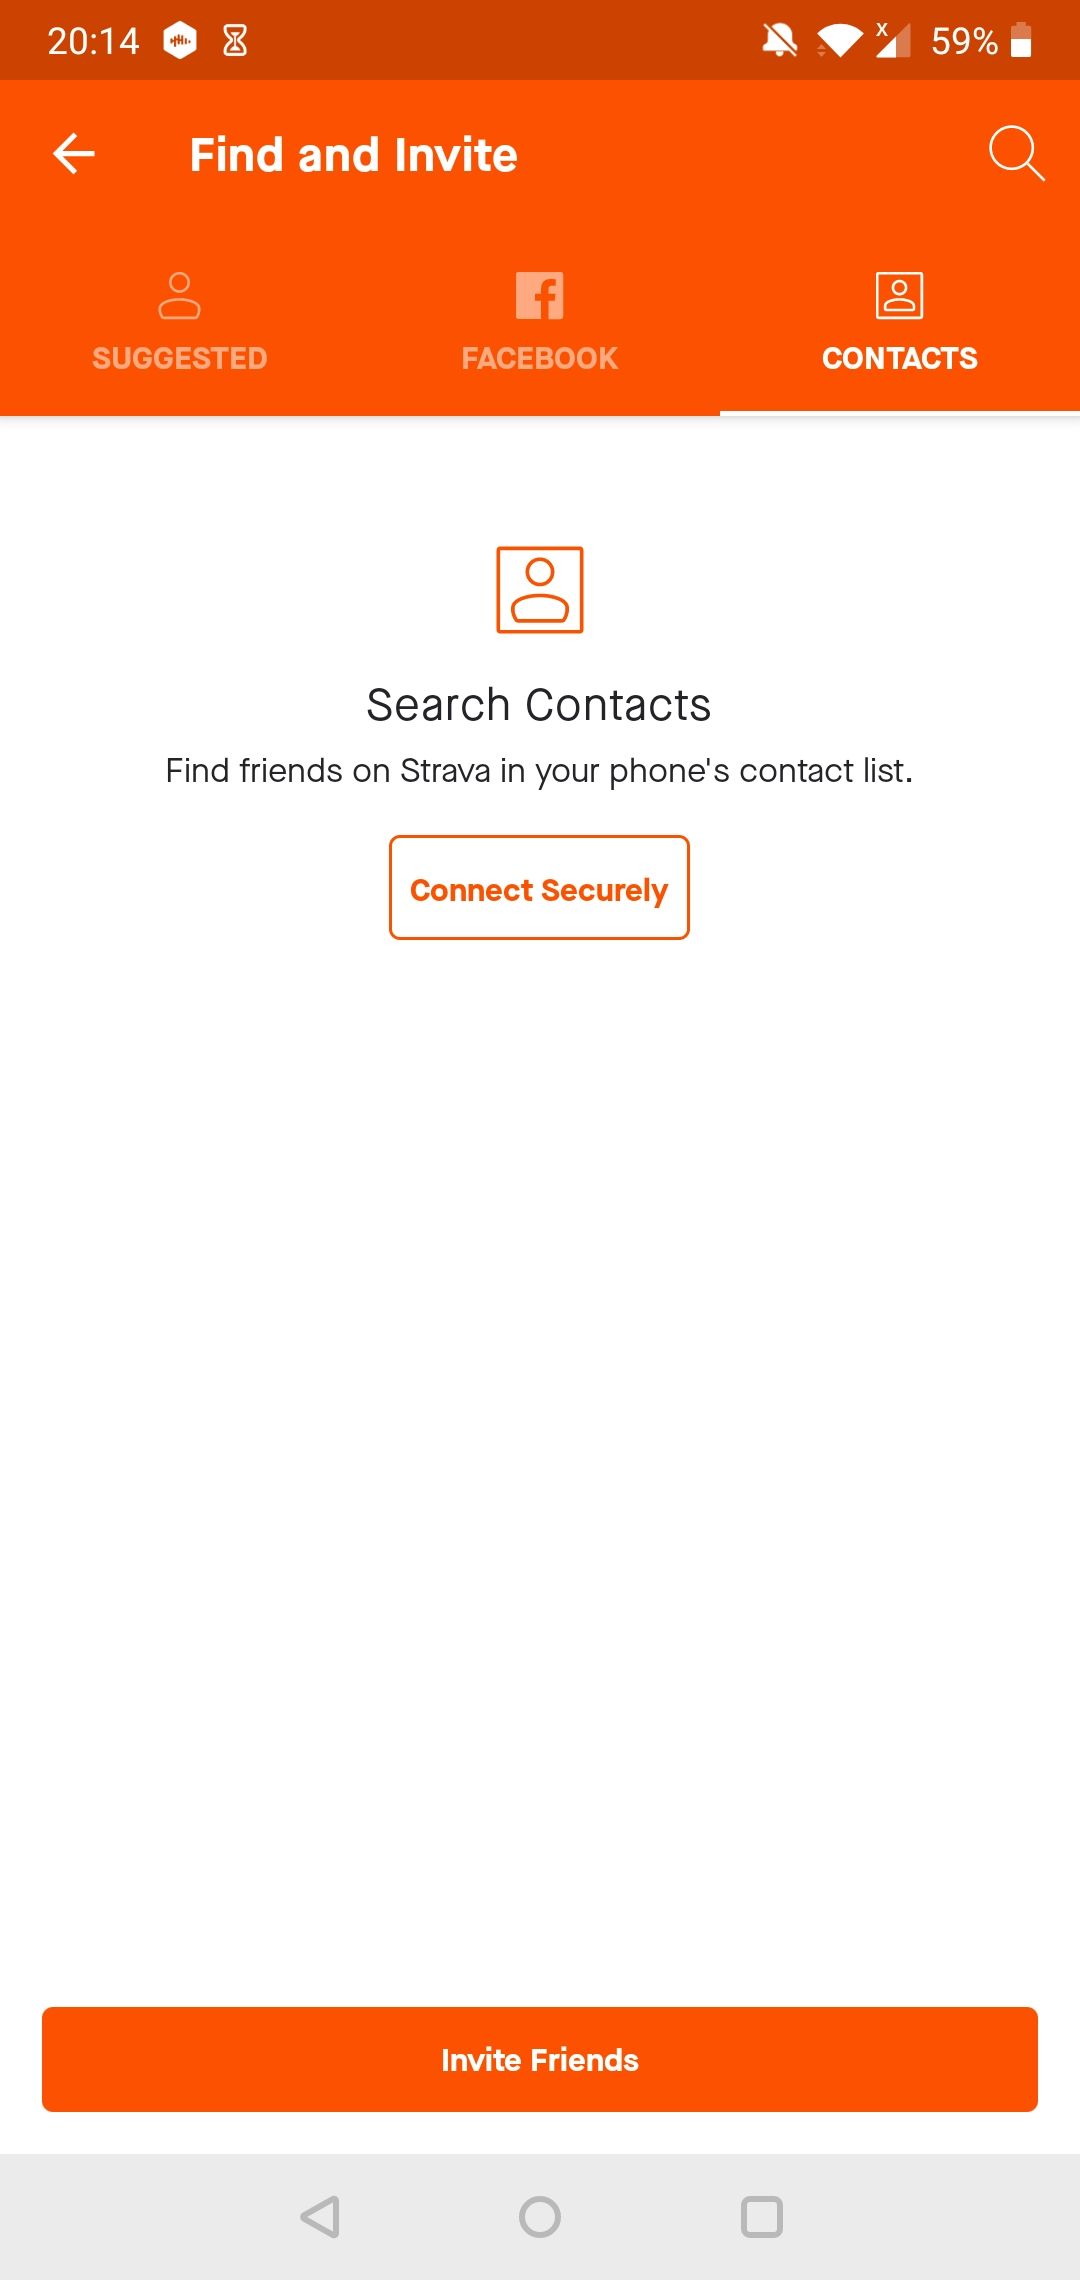 The "Find and Invite" section of the Strava Android app, showing the "Contacts" section.